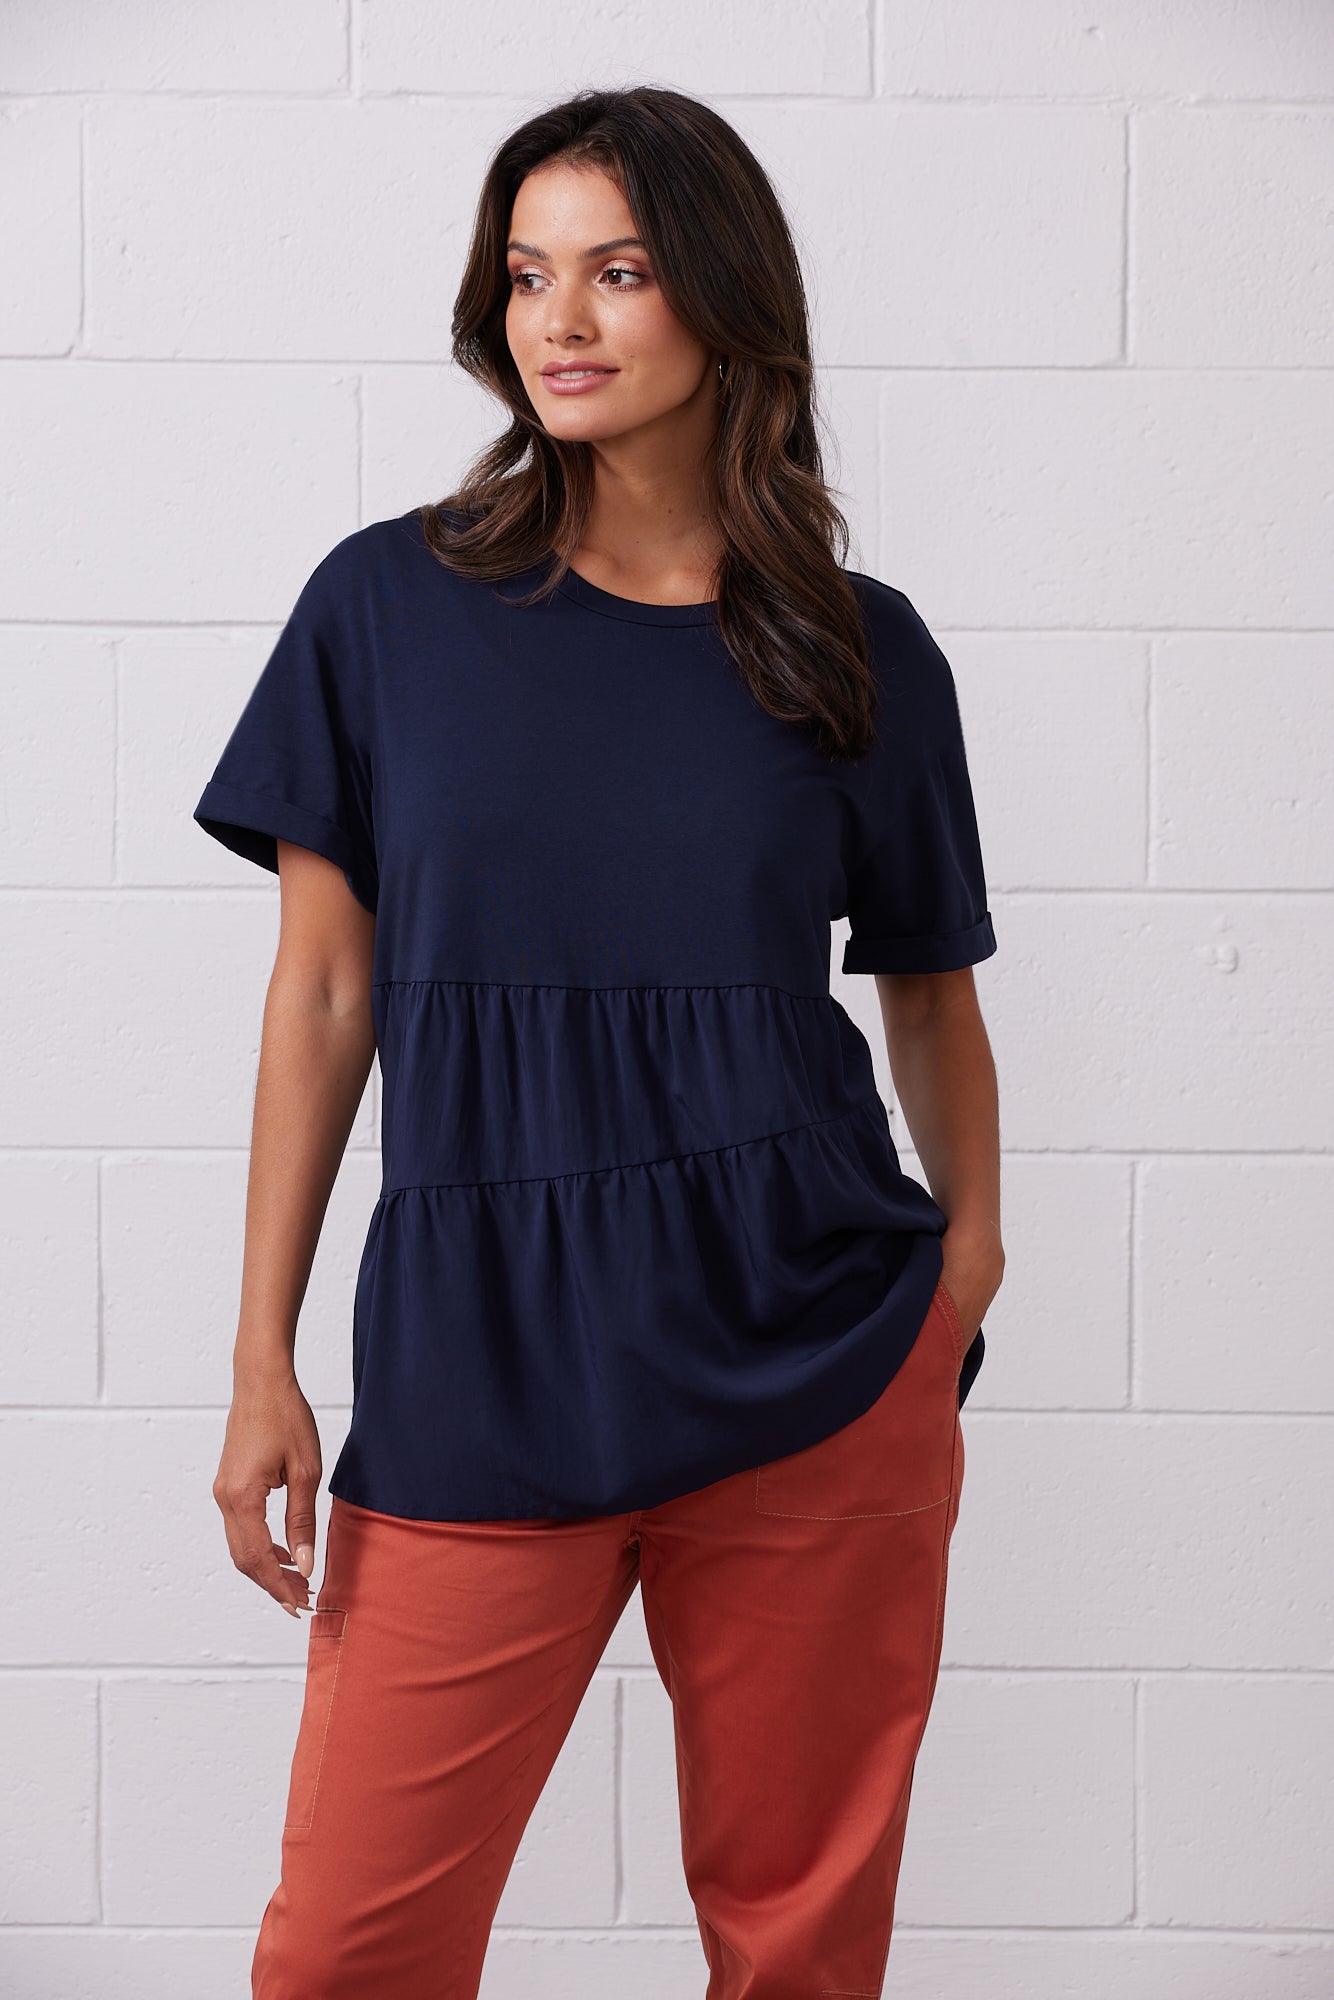 Newport -NP27704 Trixie Top - Navy and White - 70% Off